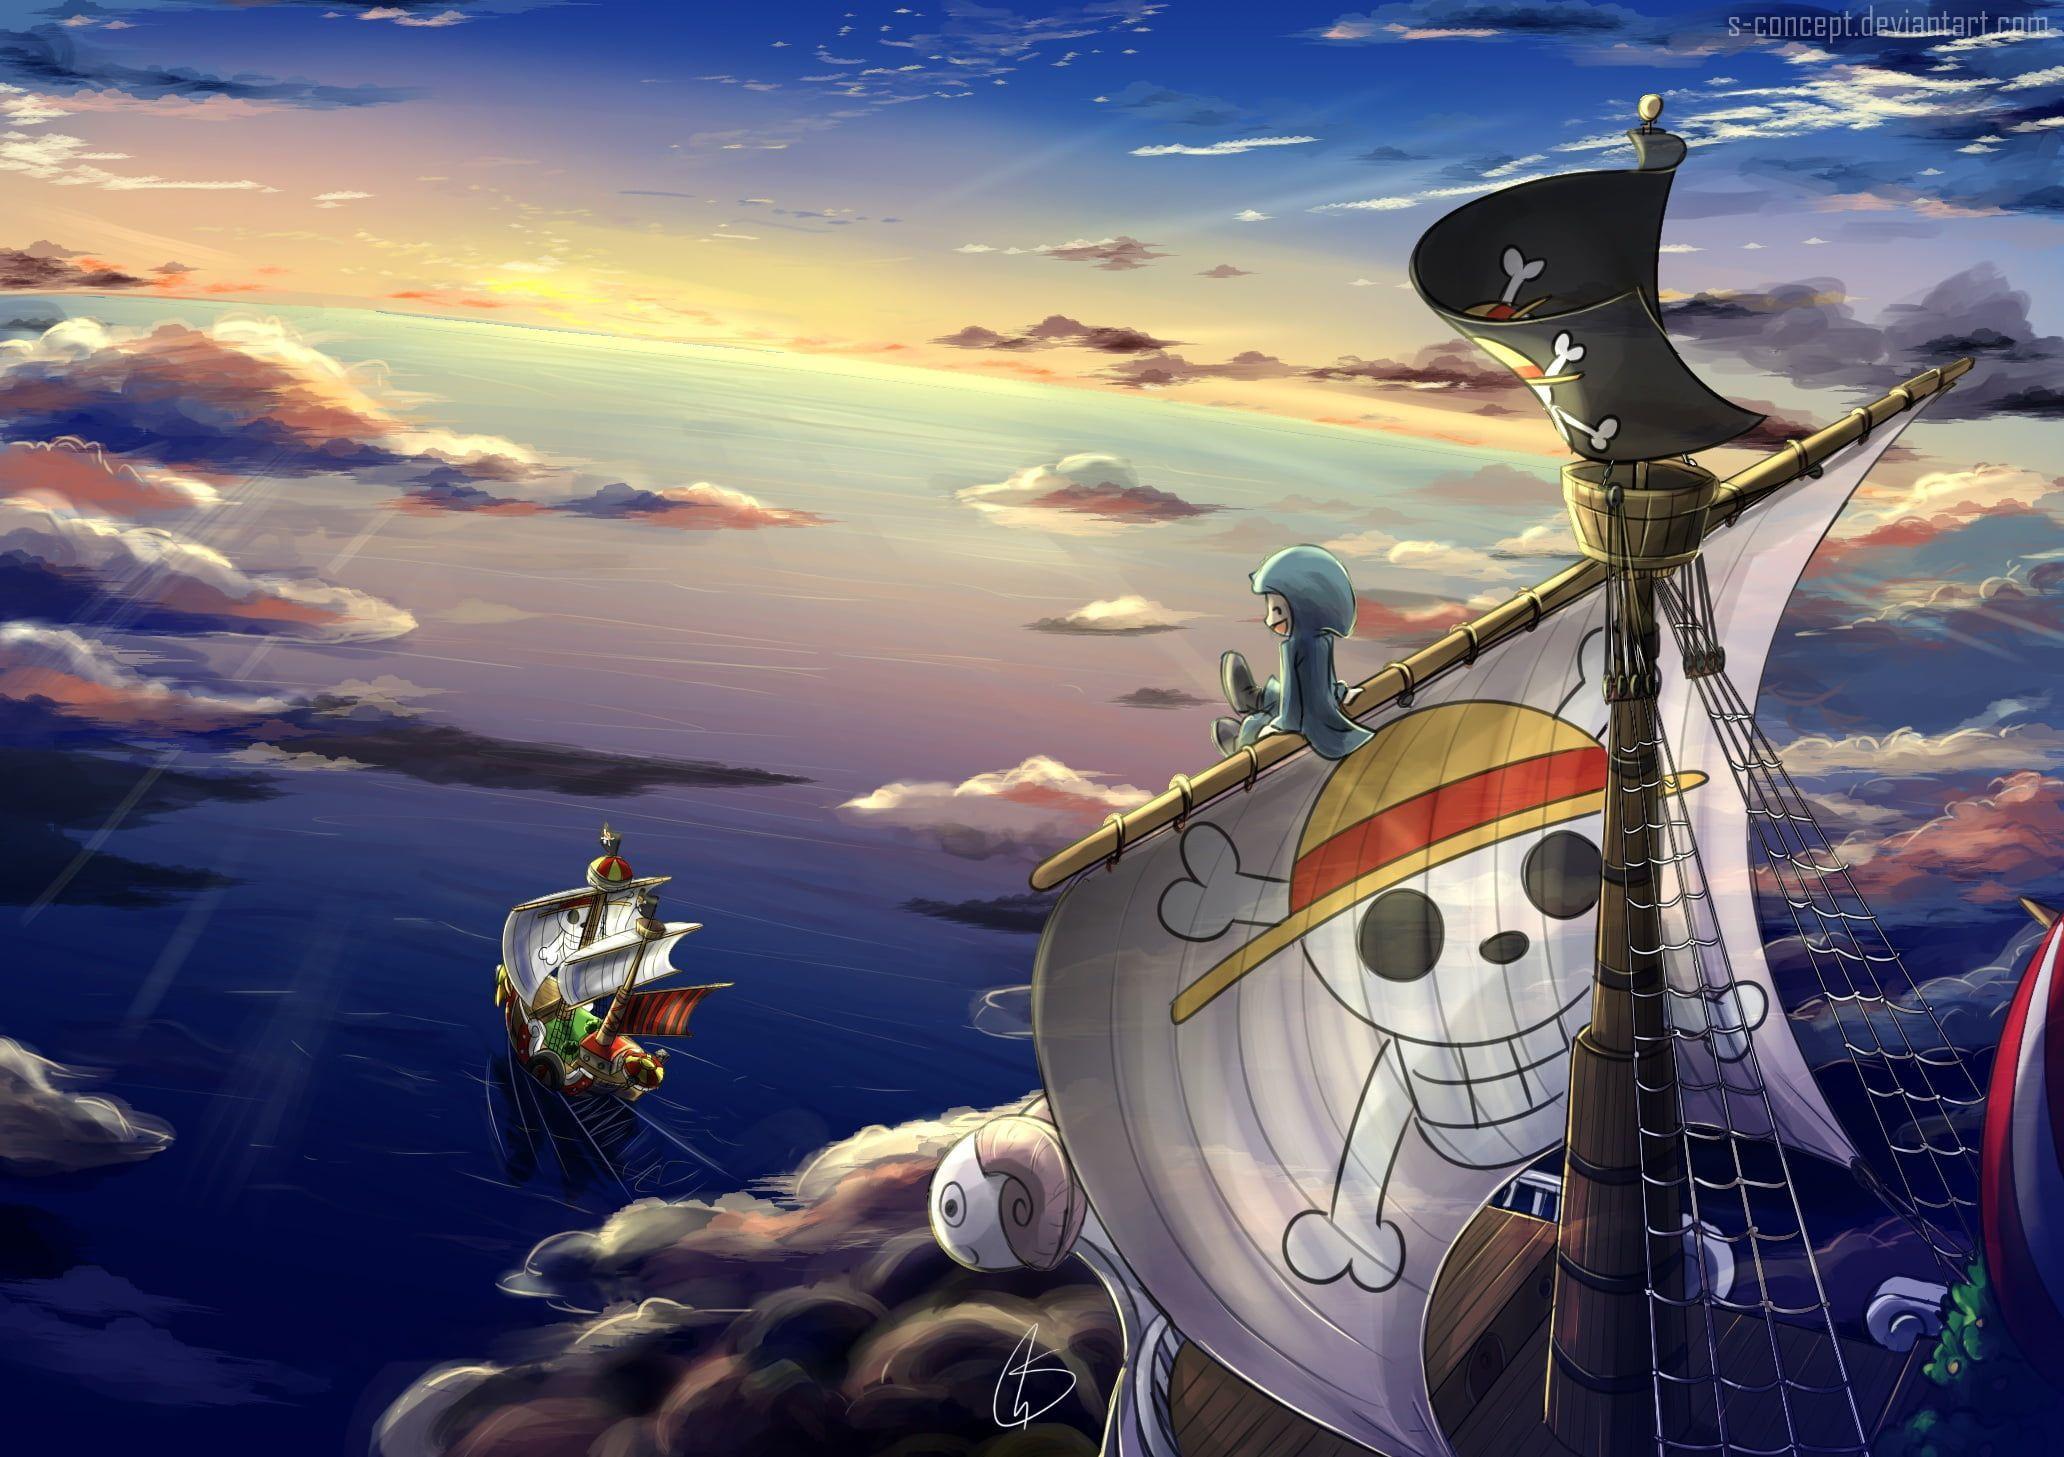 One Piece Thousand Sunny Wallpapers - Top Free One Piece Thousand Sunny ...